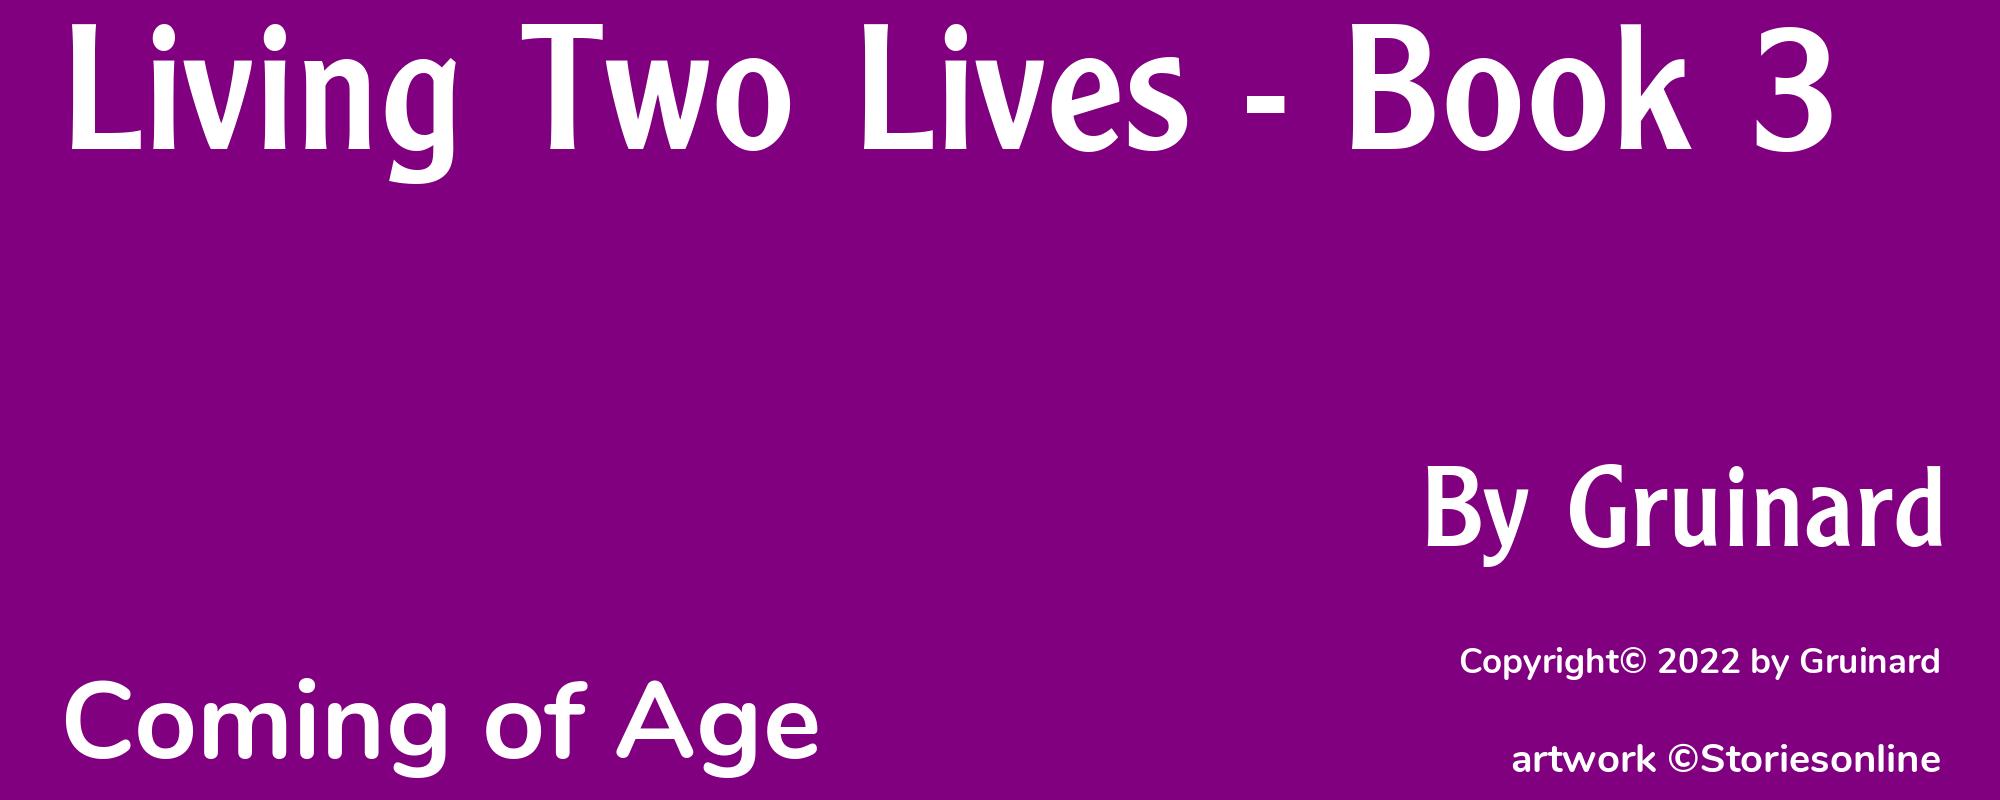 Living Two Lives - Book 3 - Cover